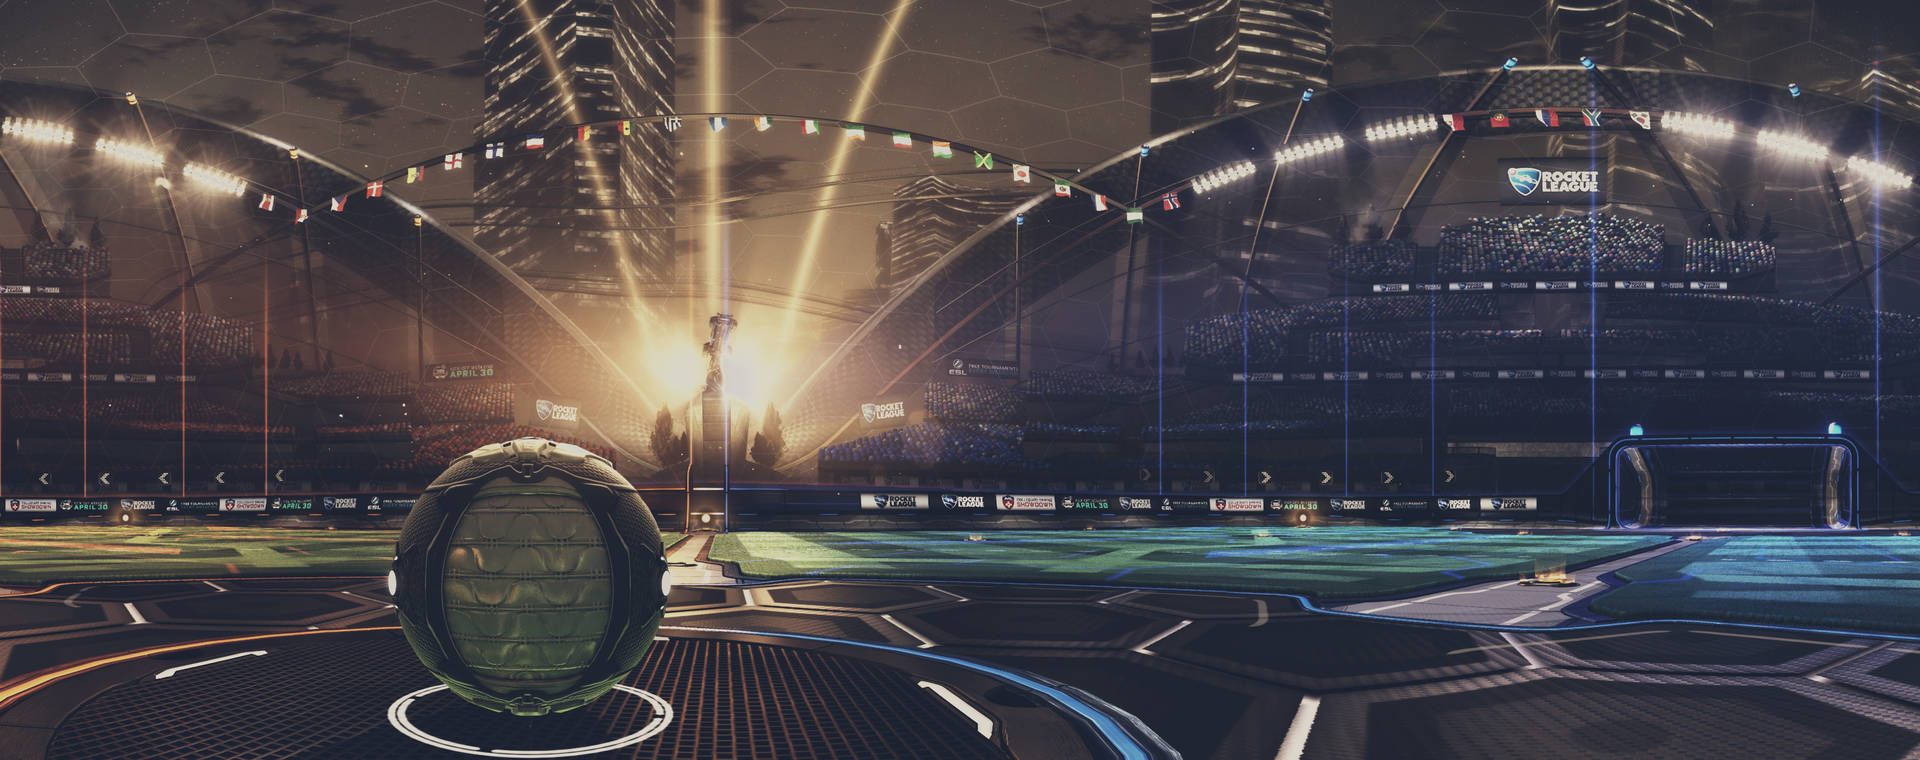 Spectacular Panorama of Rocket League Field in 2K Resolution Wallpaper